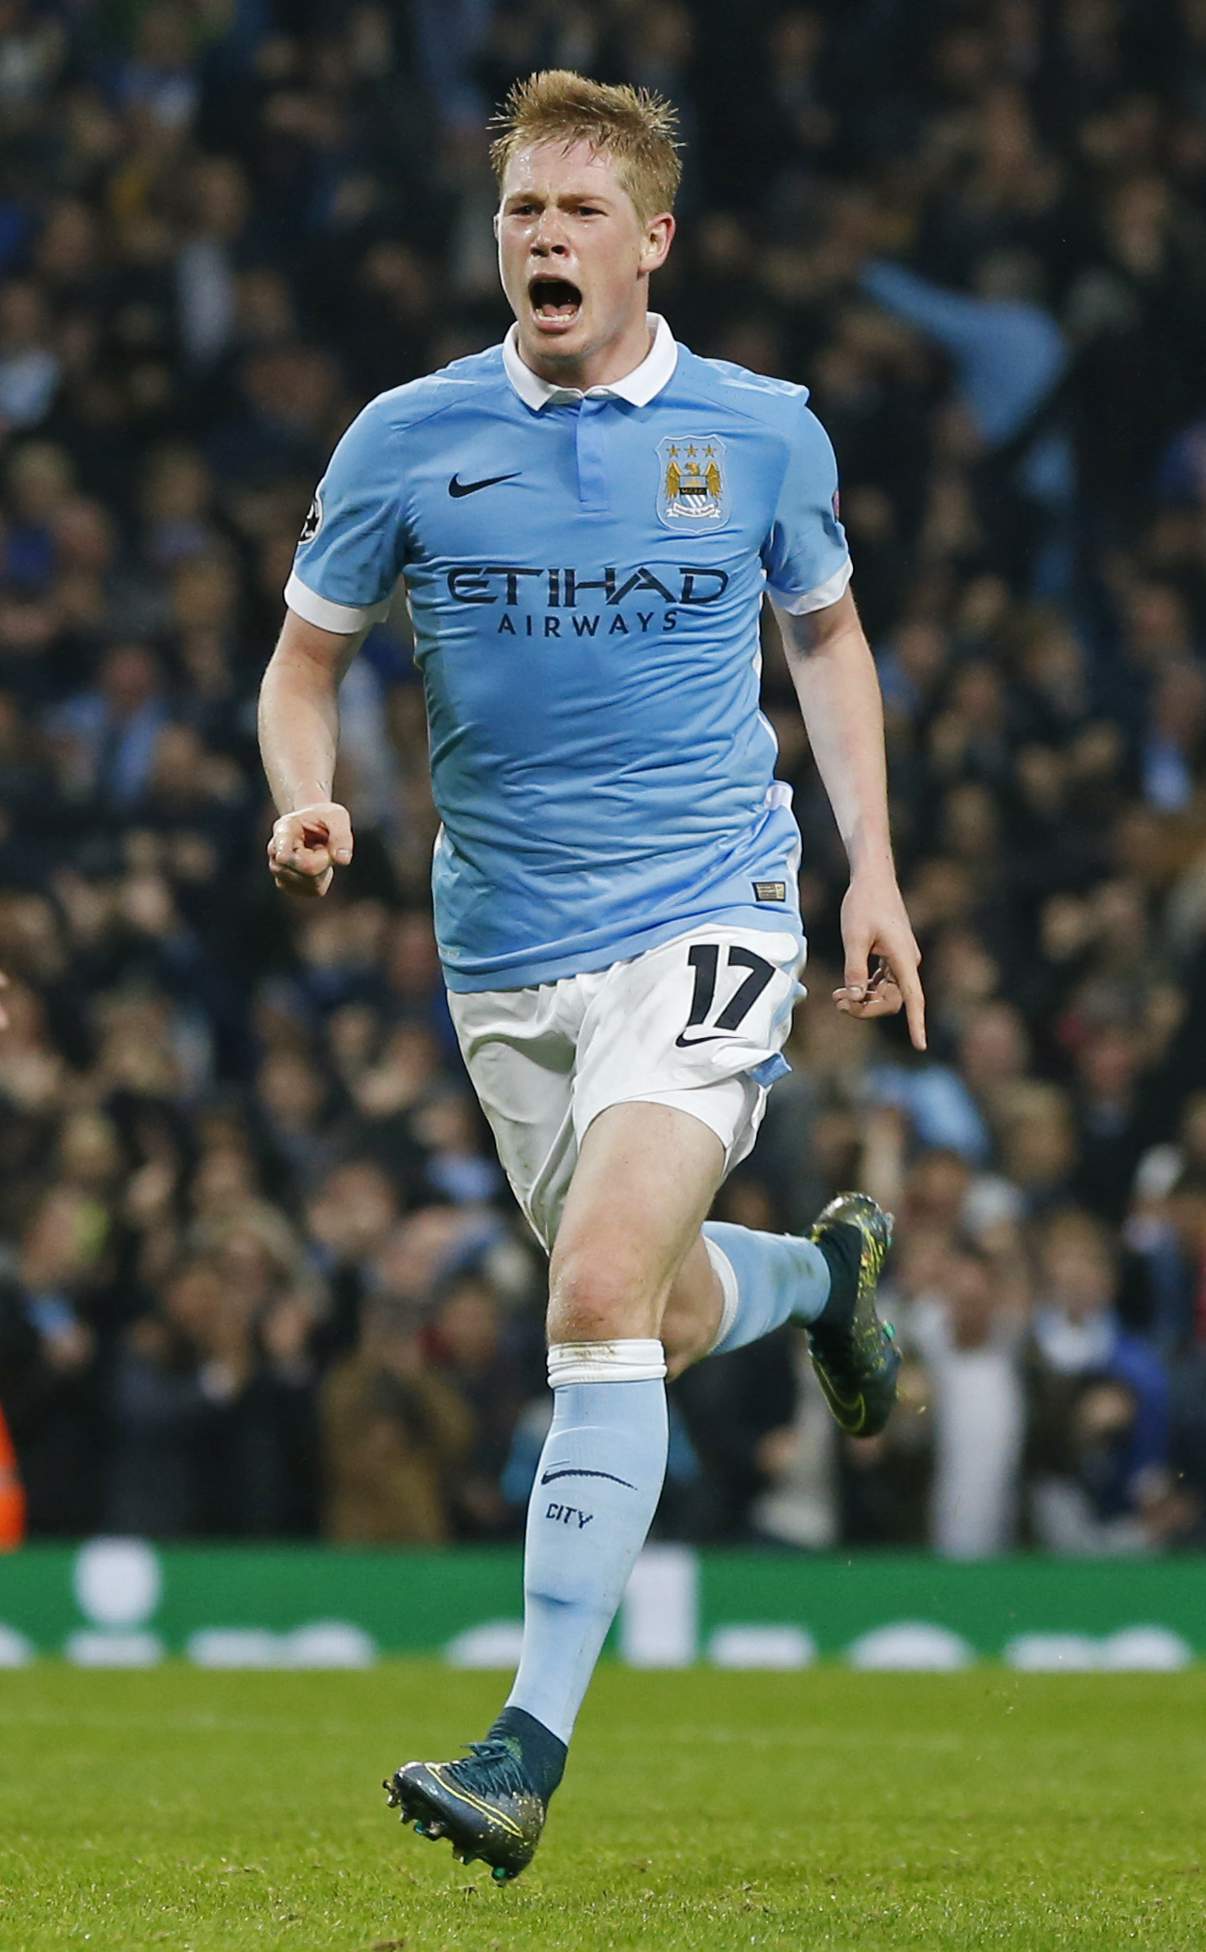 Football - Manchester City v Sevilla - UEFA Champions League Group Stage - Group D - Etihad Stadium, Manchester, England - 21/10/15 Manchester City's Kevin De Bruyne celebrates scoring their second goal Reuters / Phil Noble Livepic EDITORIAL USE ONLY.